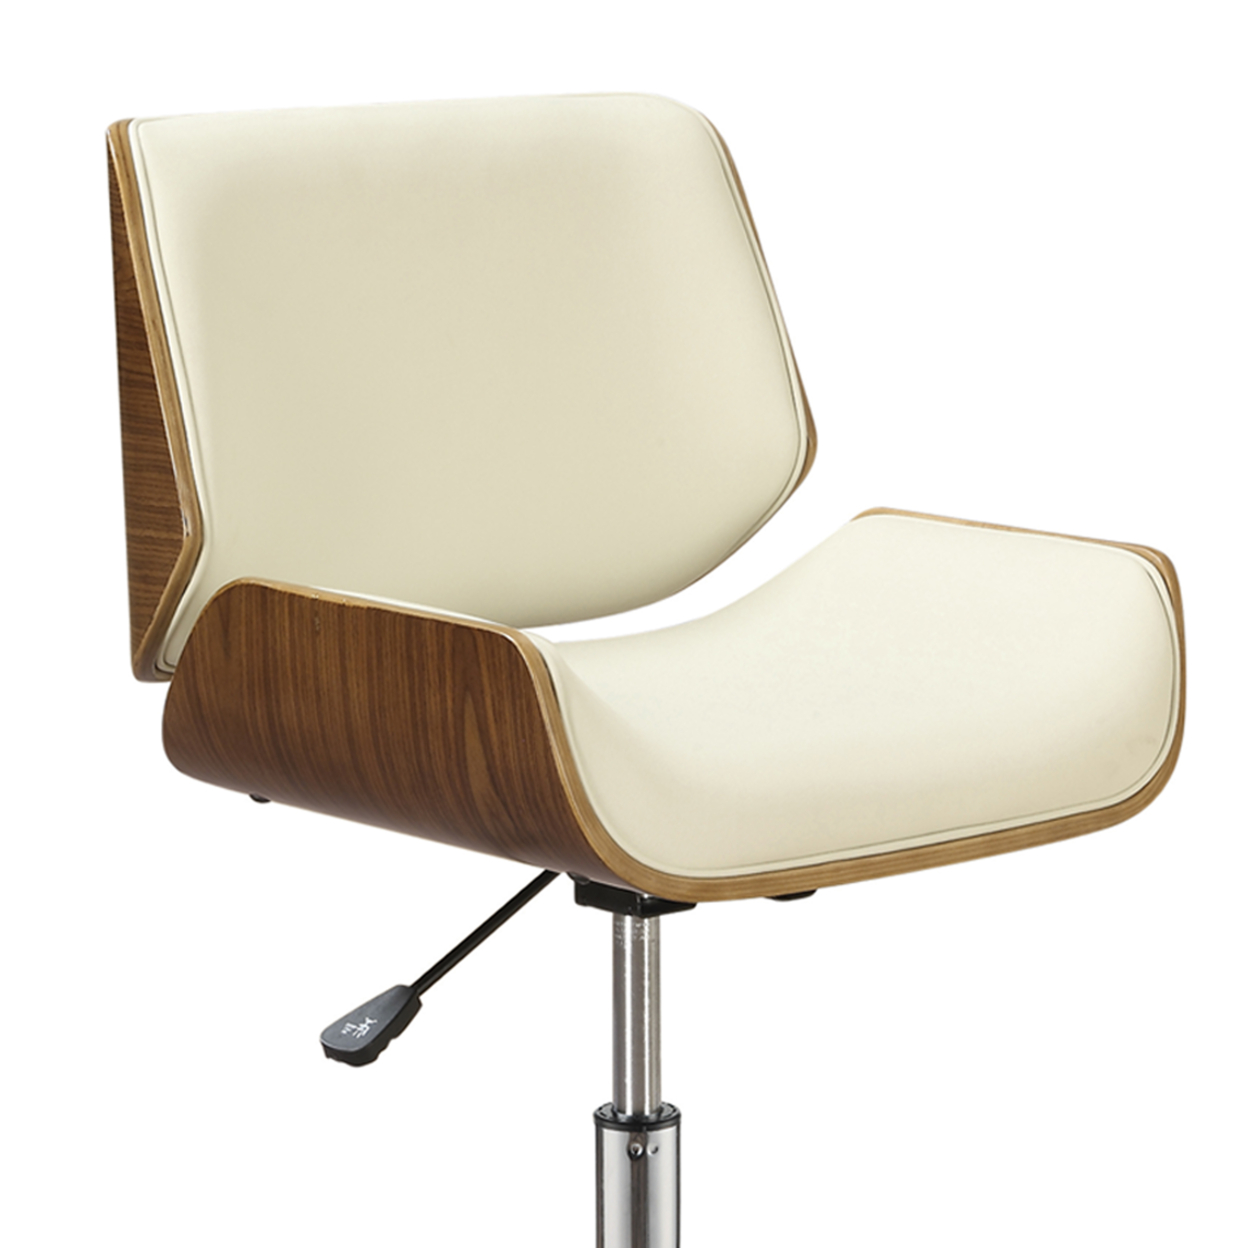 30 Inch Office Chair, Curved Back And Seat, Wooden Support, Cream Leatherette